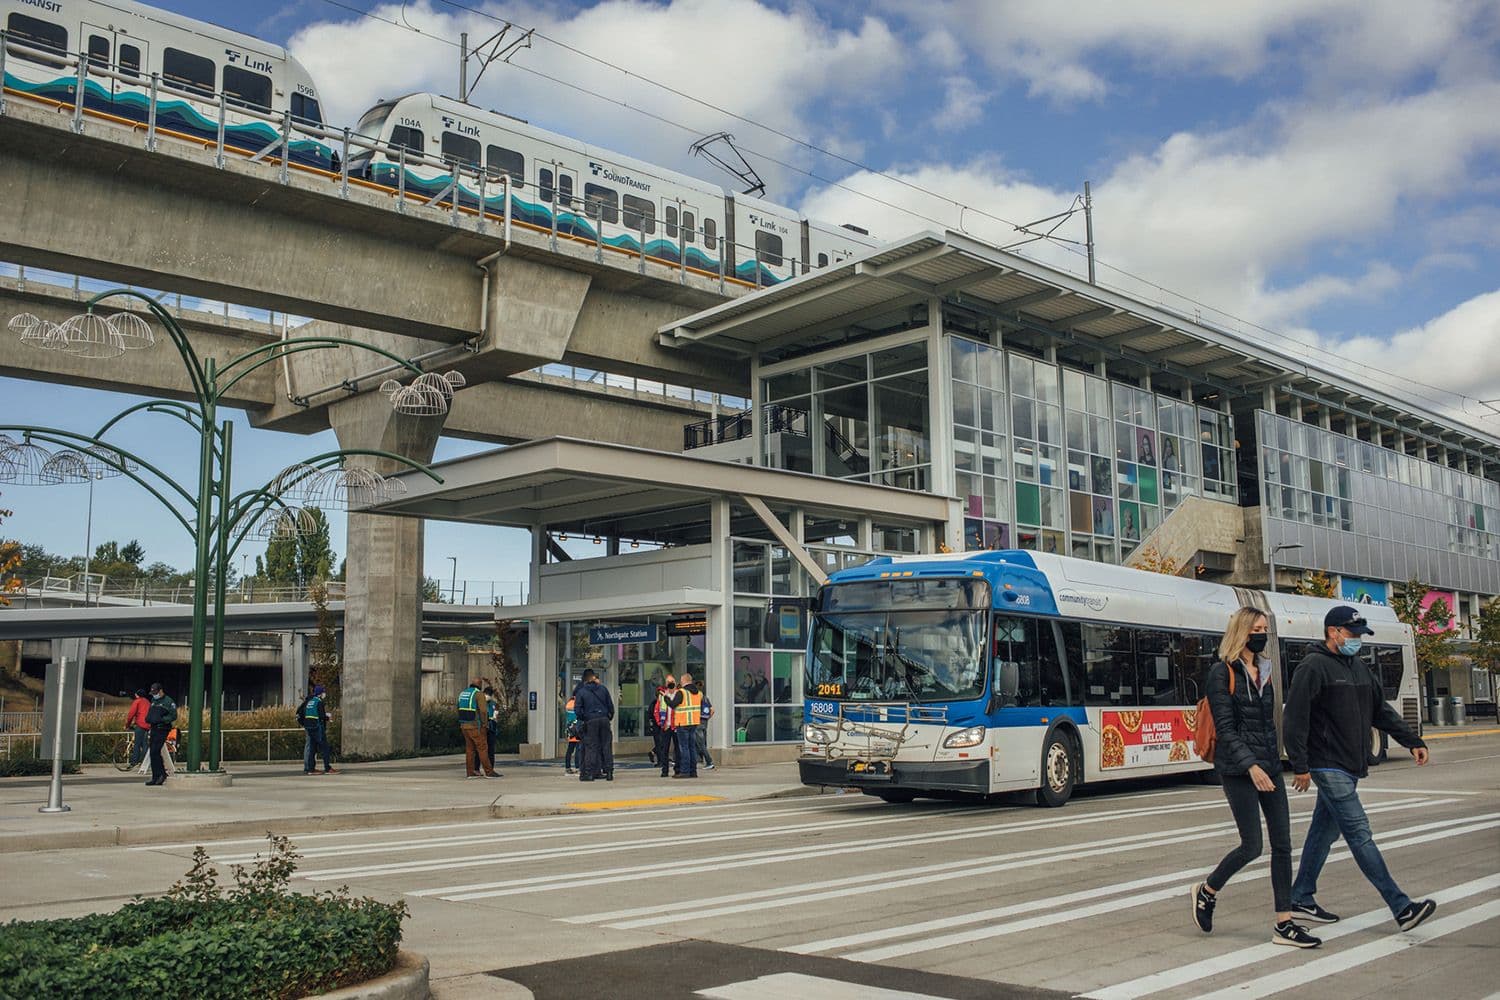 The east side of Northgate Station, showing Link light rail and a Community Transit bus.